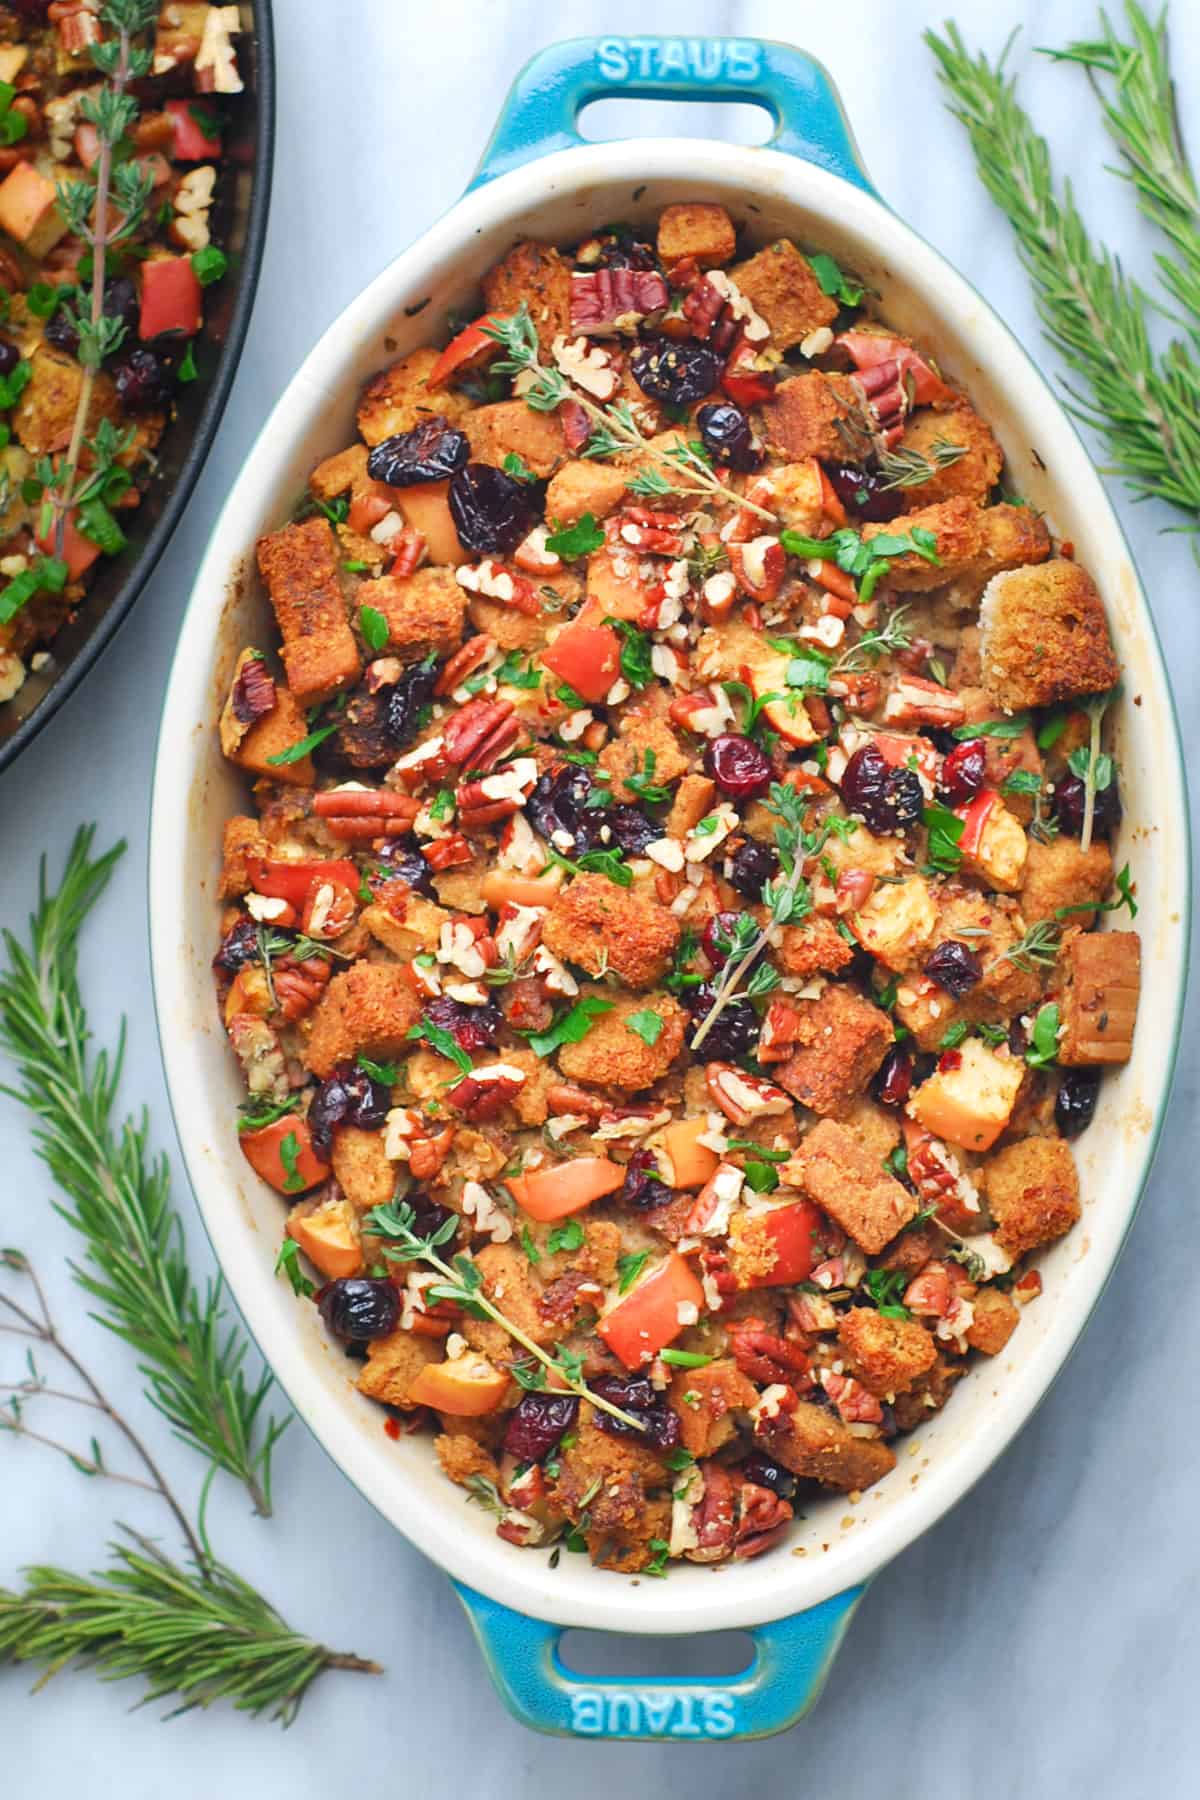 sausage stuffing with apples, cranberries, and pecans in an oval baking dish